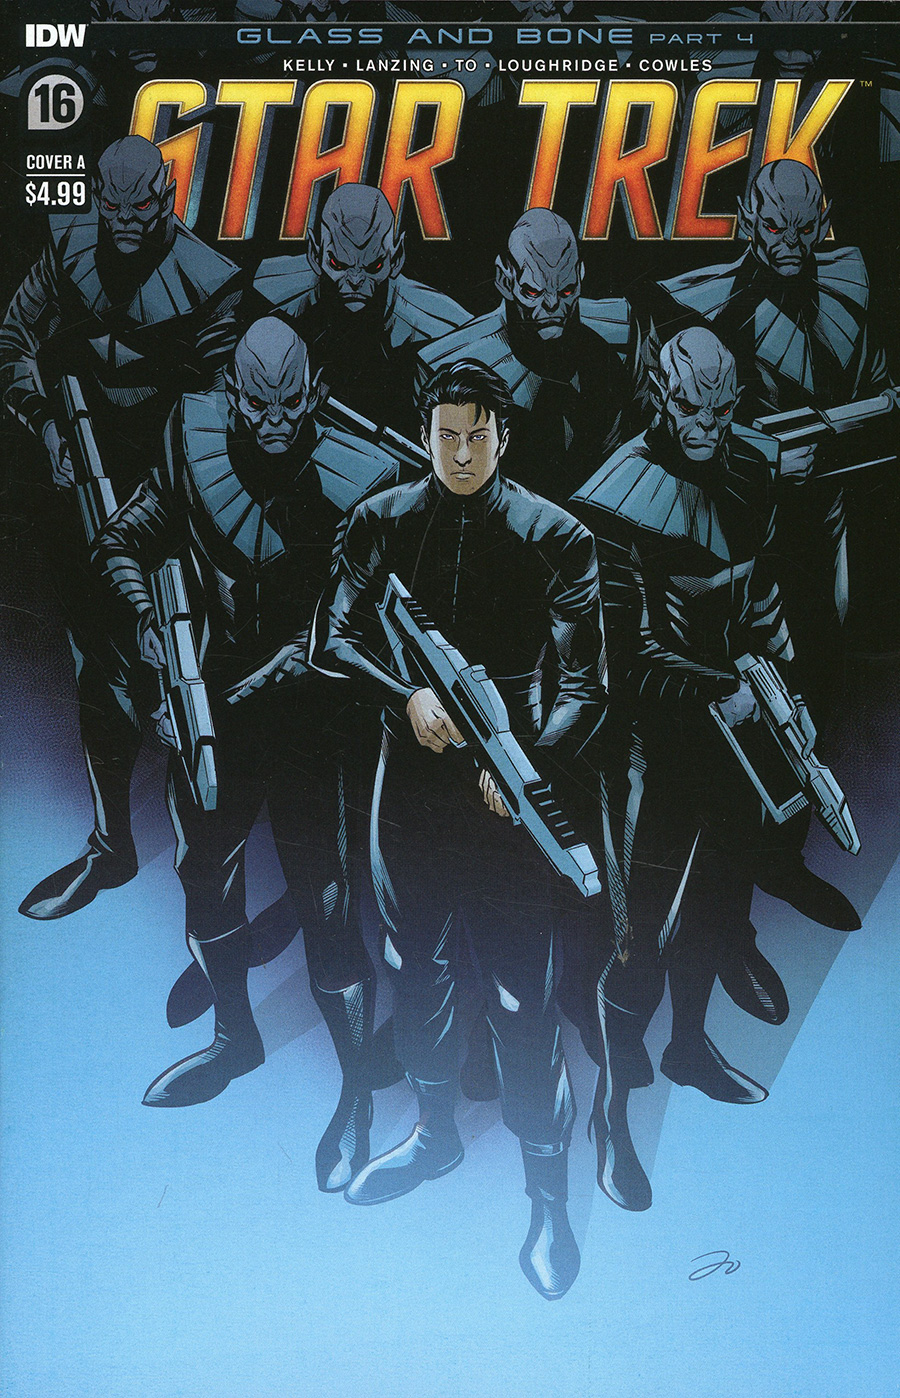 Star Trek (IDW) Vol 2 #16 Cover A Regular Marcus To Cover